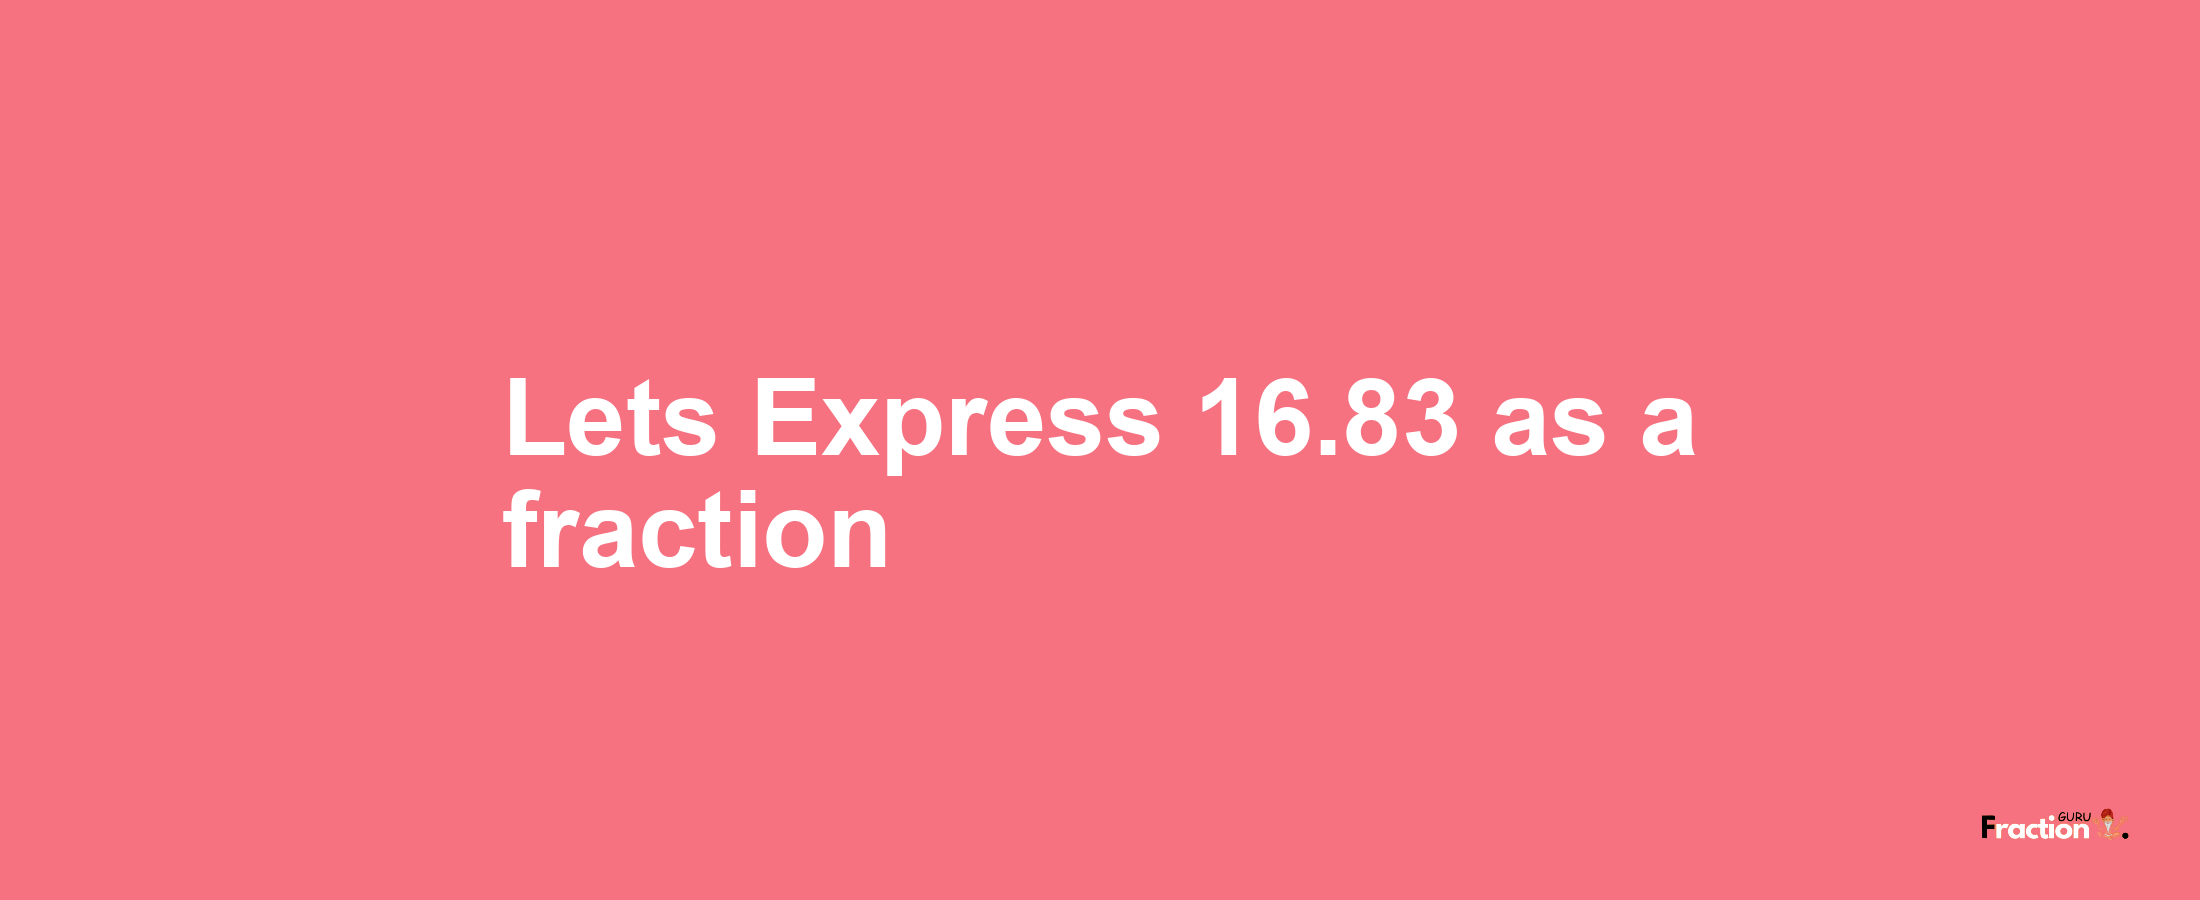 Lets Express 16.83 as afraction